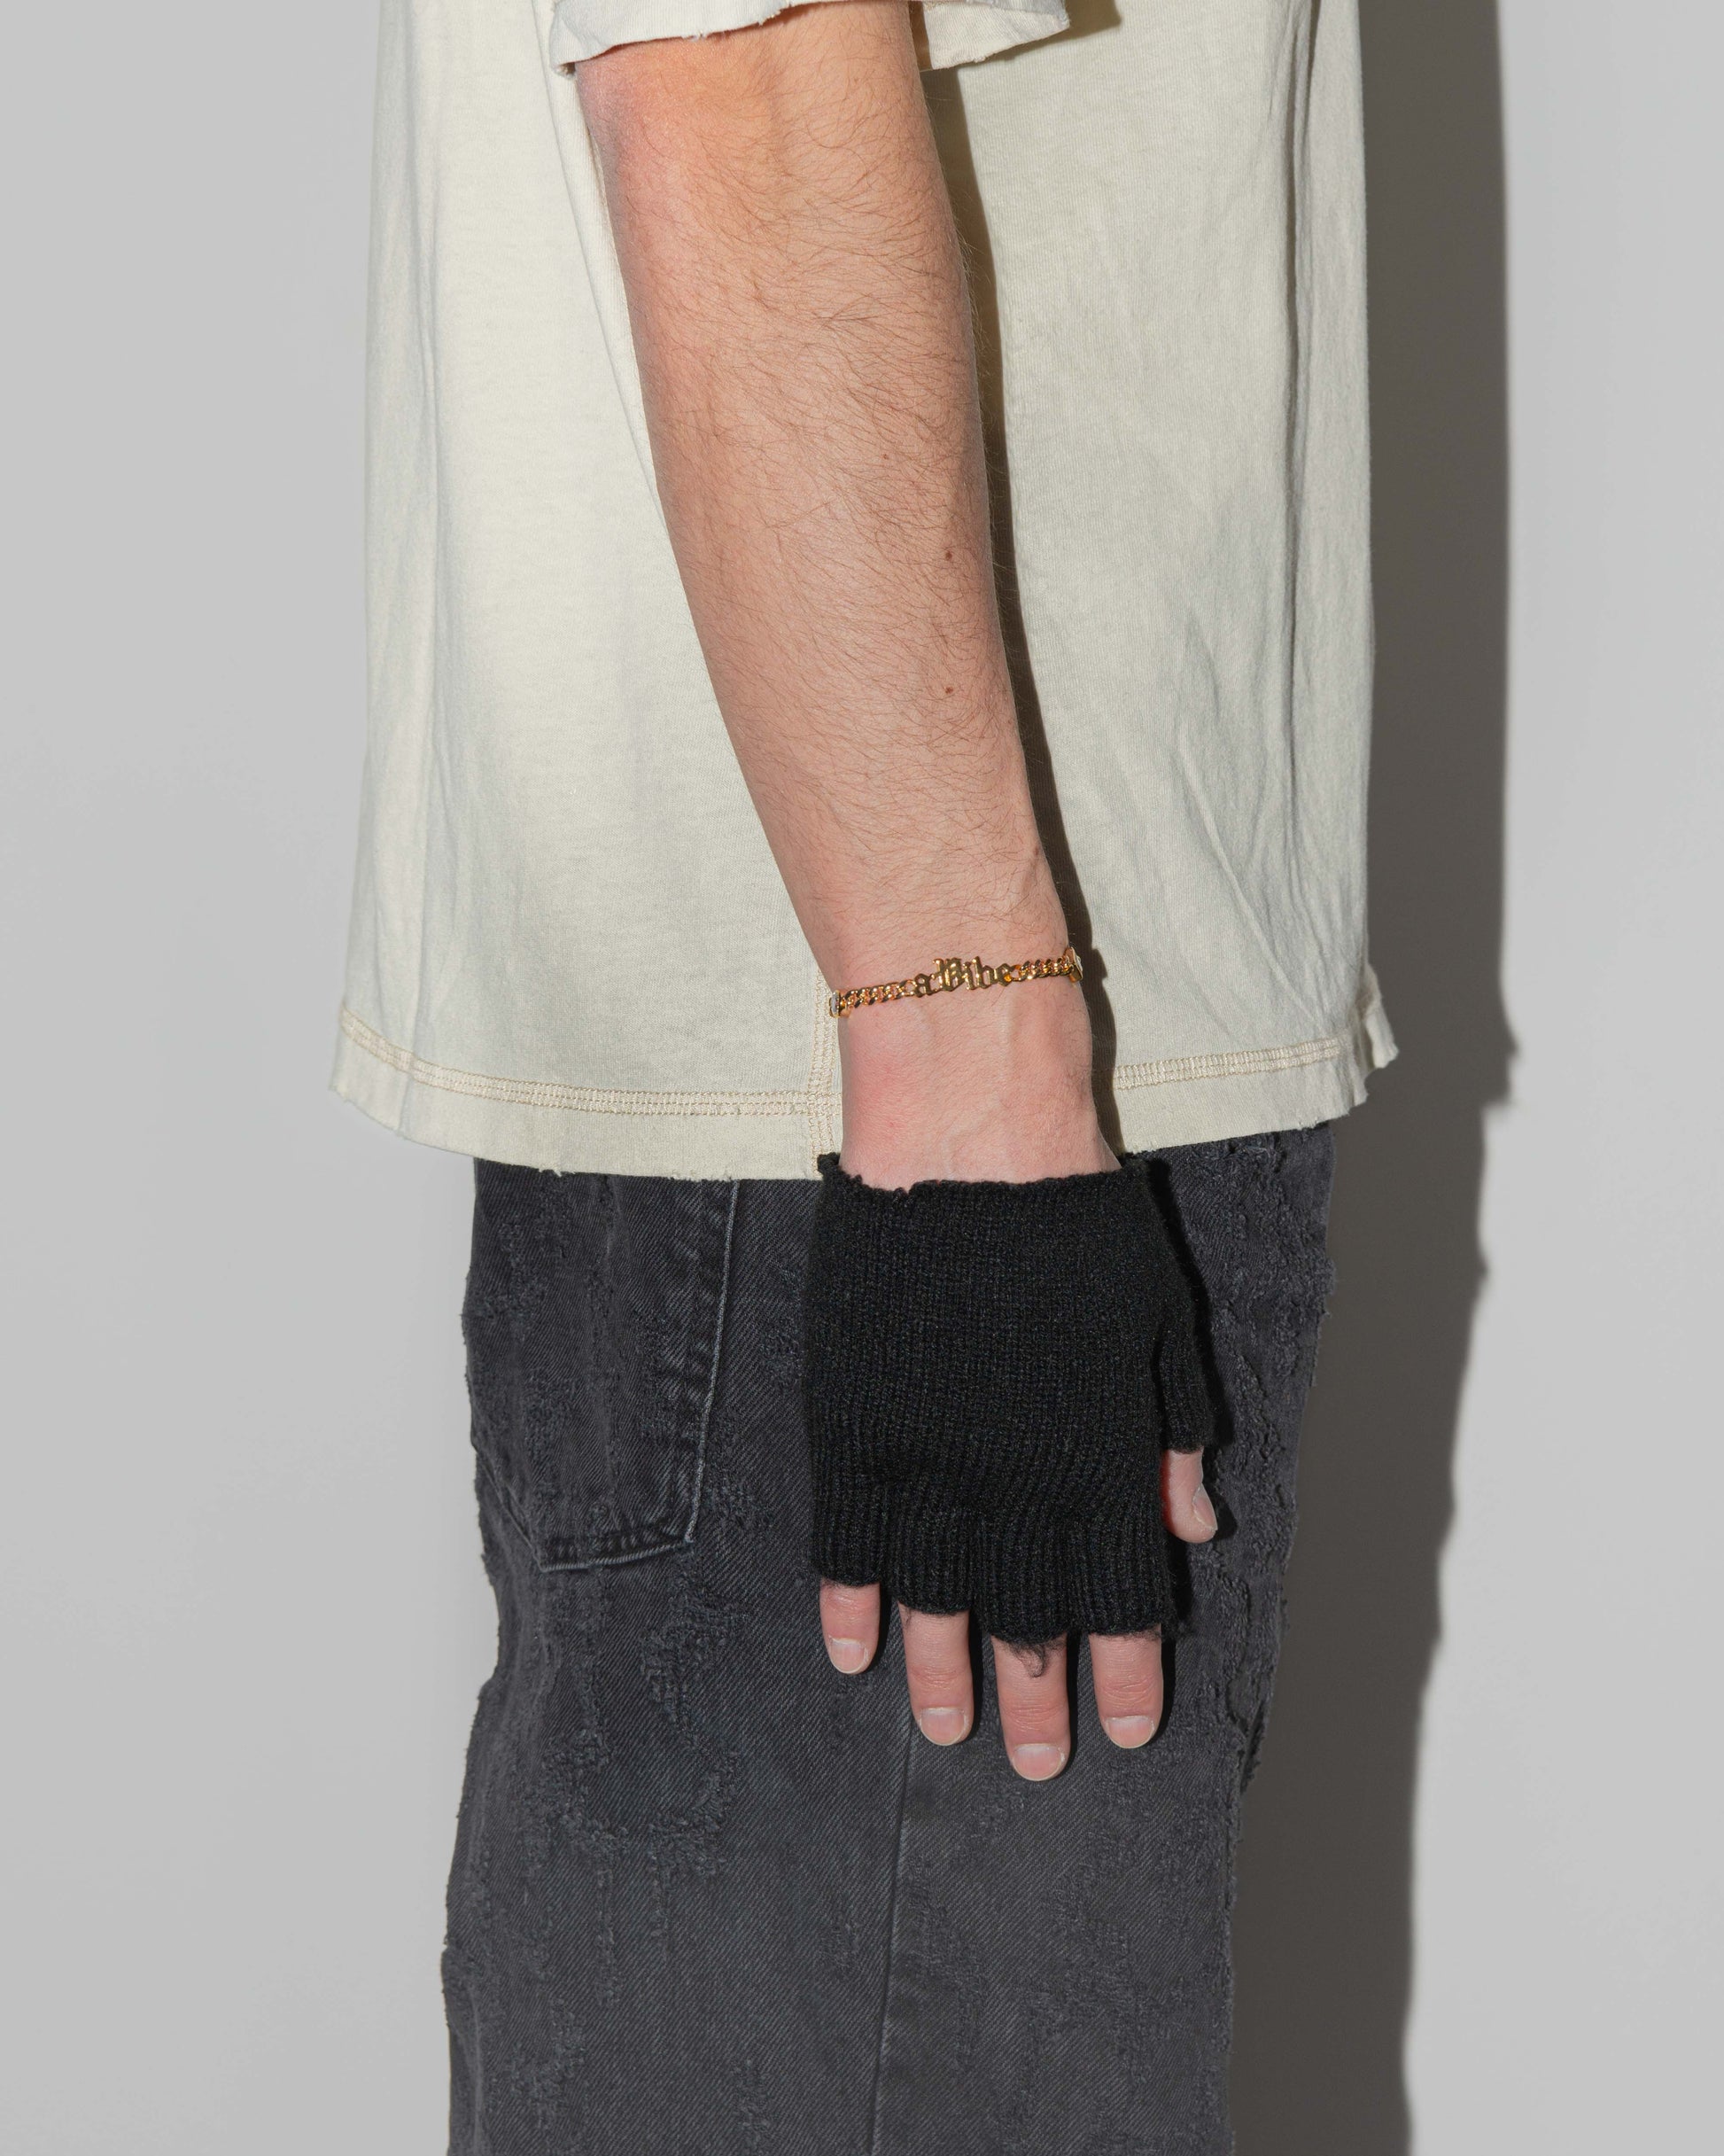 man wearing a vibe cuban chain bracelet with 18kt yellow gold coating, mixed shape bezel stones in diamond white, yellow, garnet, tanzanite and "A Vibe" central metal tag